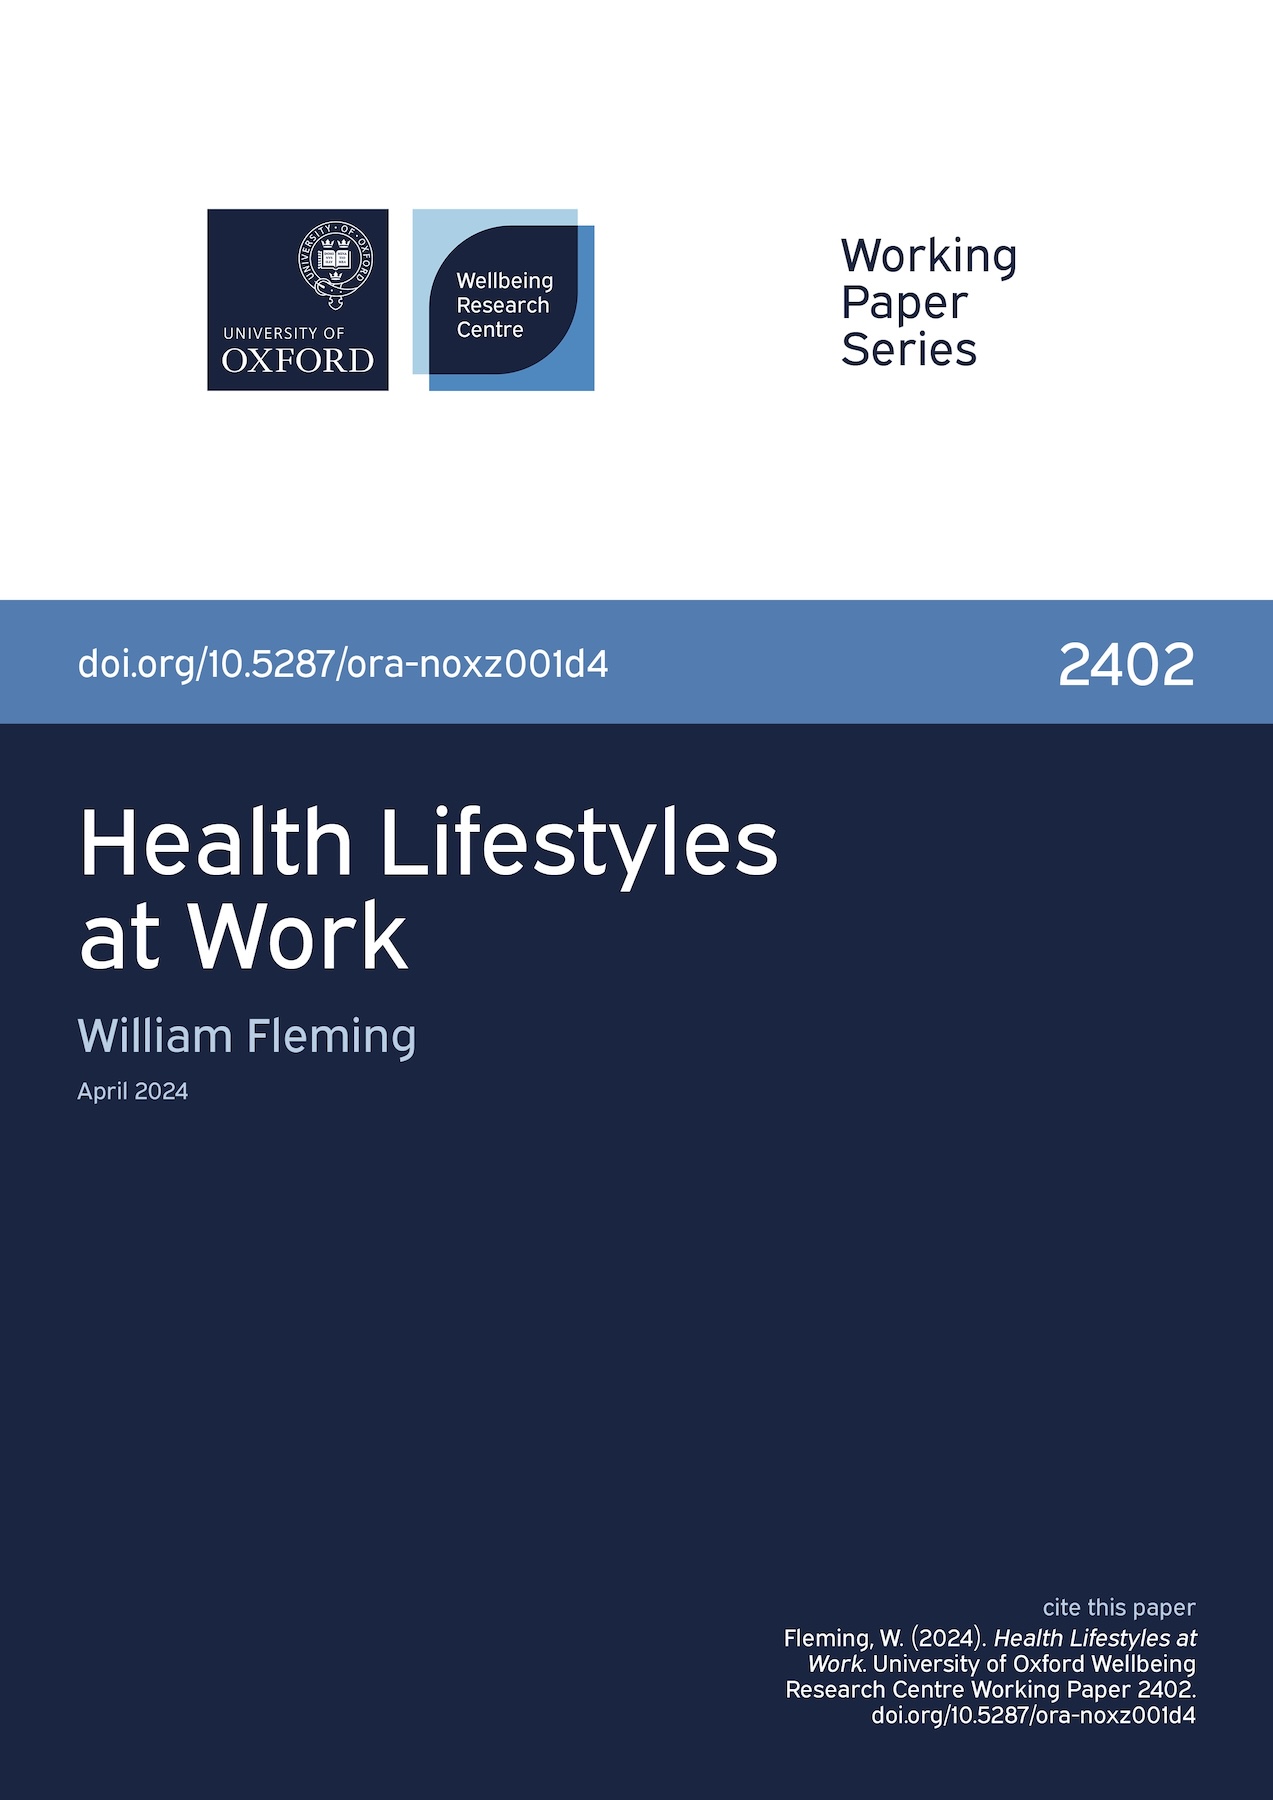 Cover for Working Paper 2402, Health Lifestyles at Work.